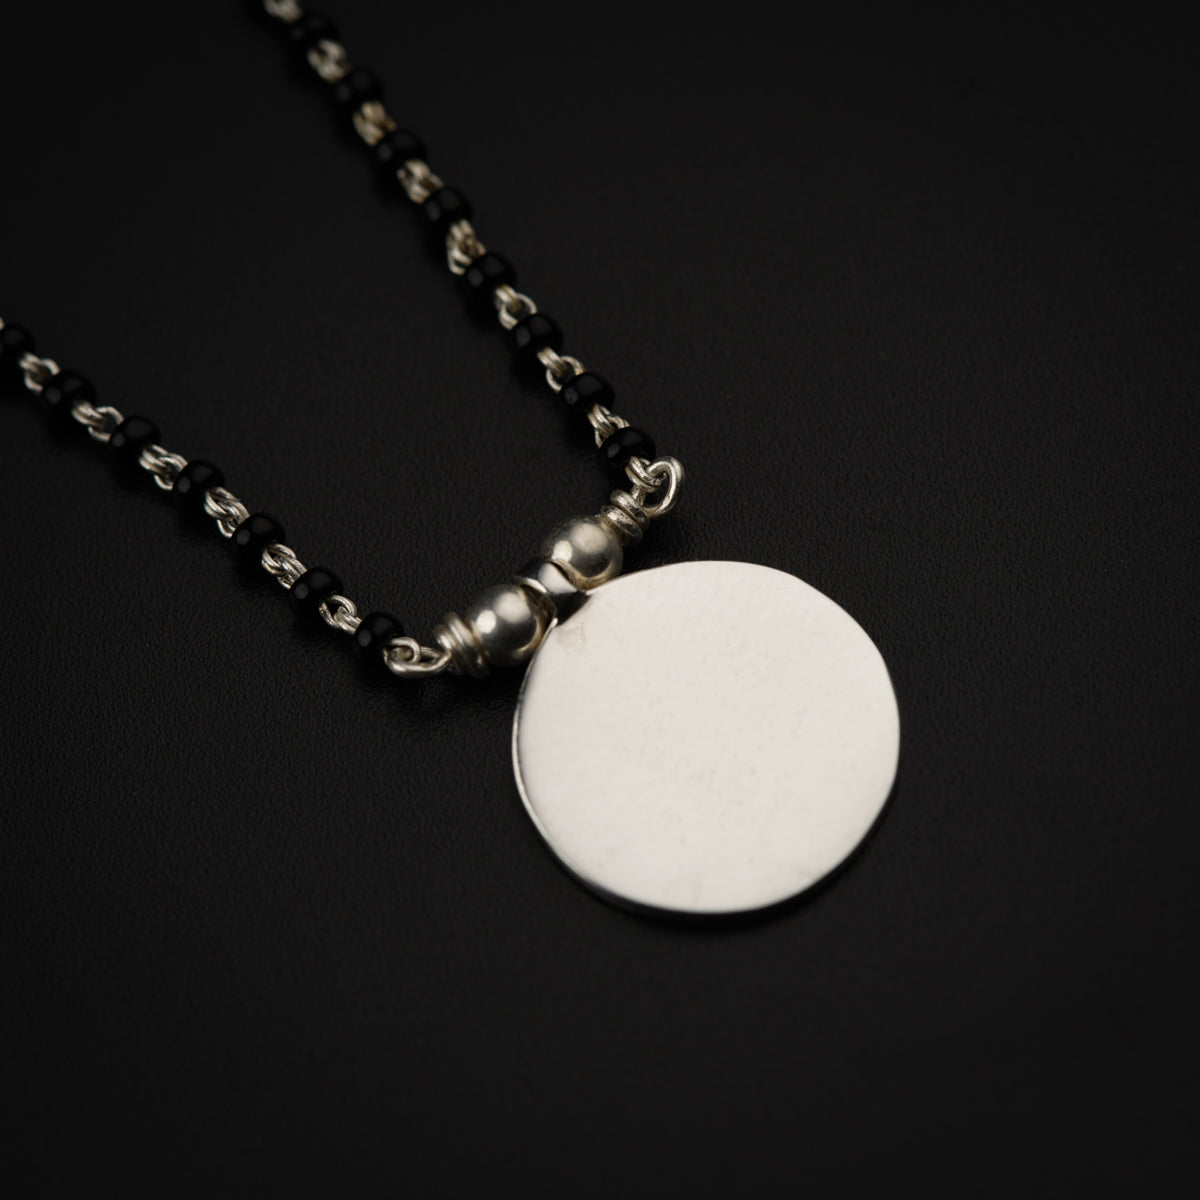 a silver disc on a chain on a black surface